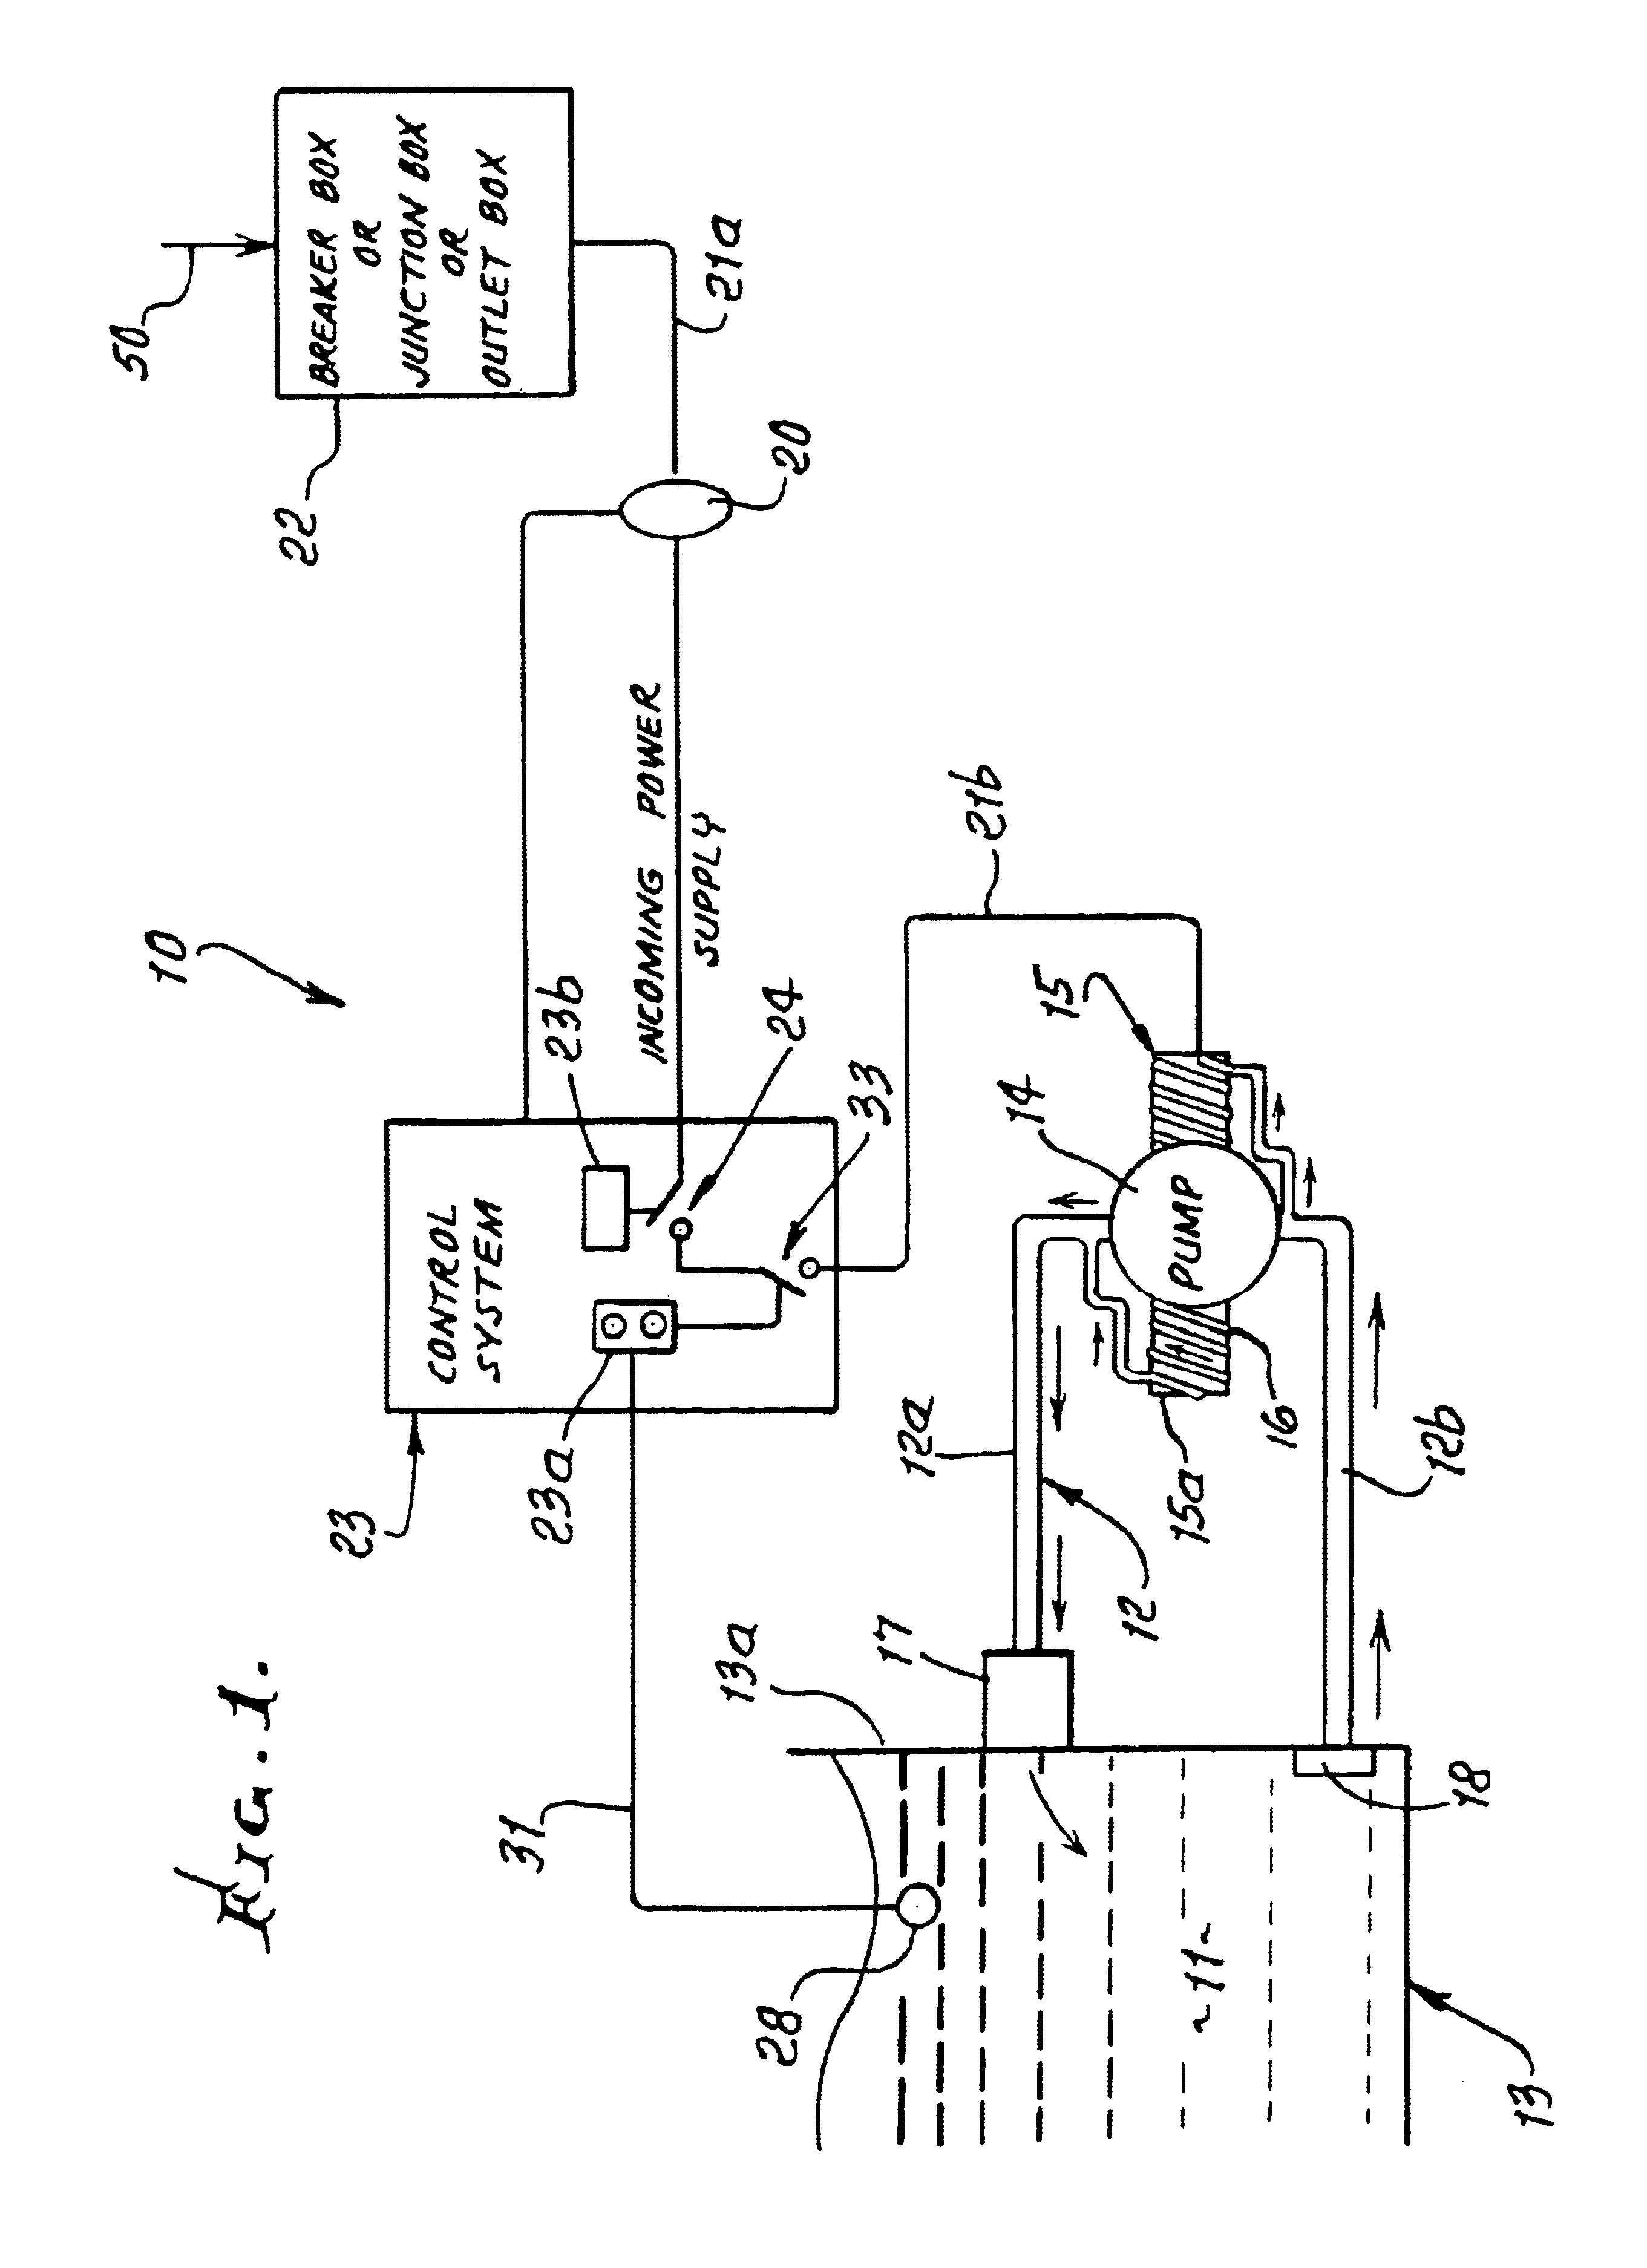 Method and means for controlling electrical distribution